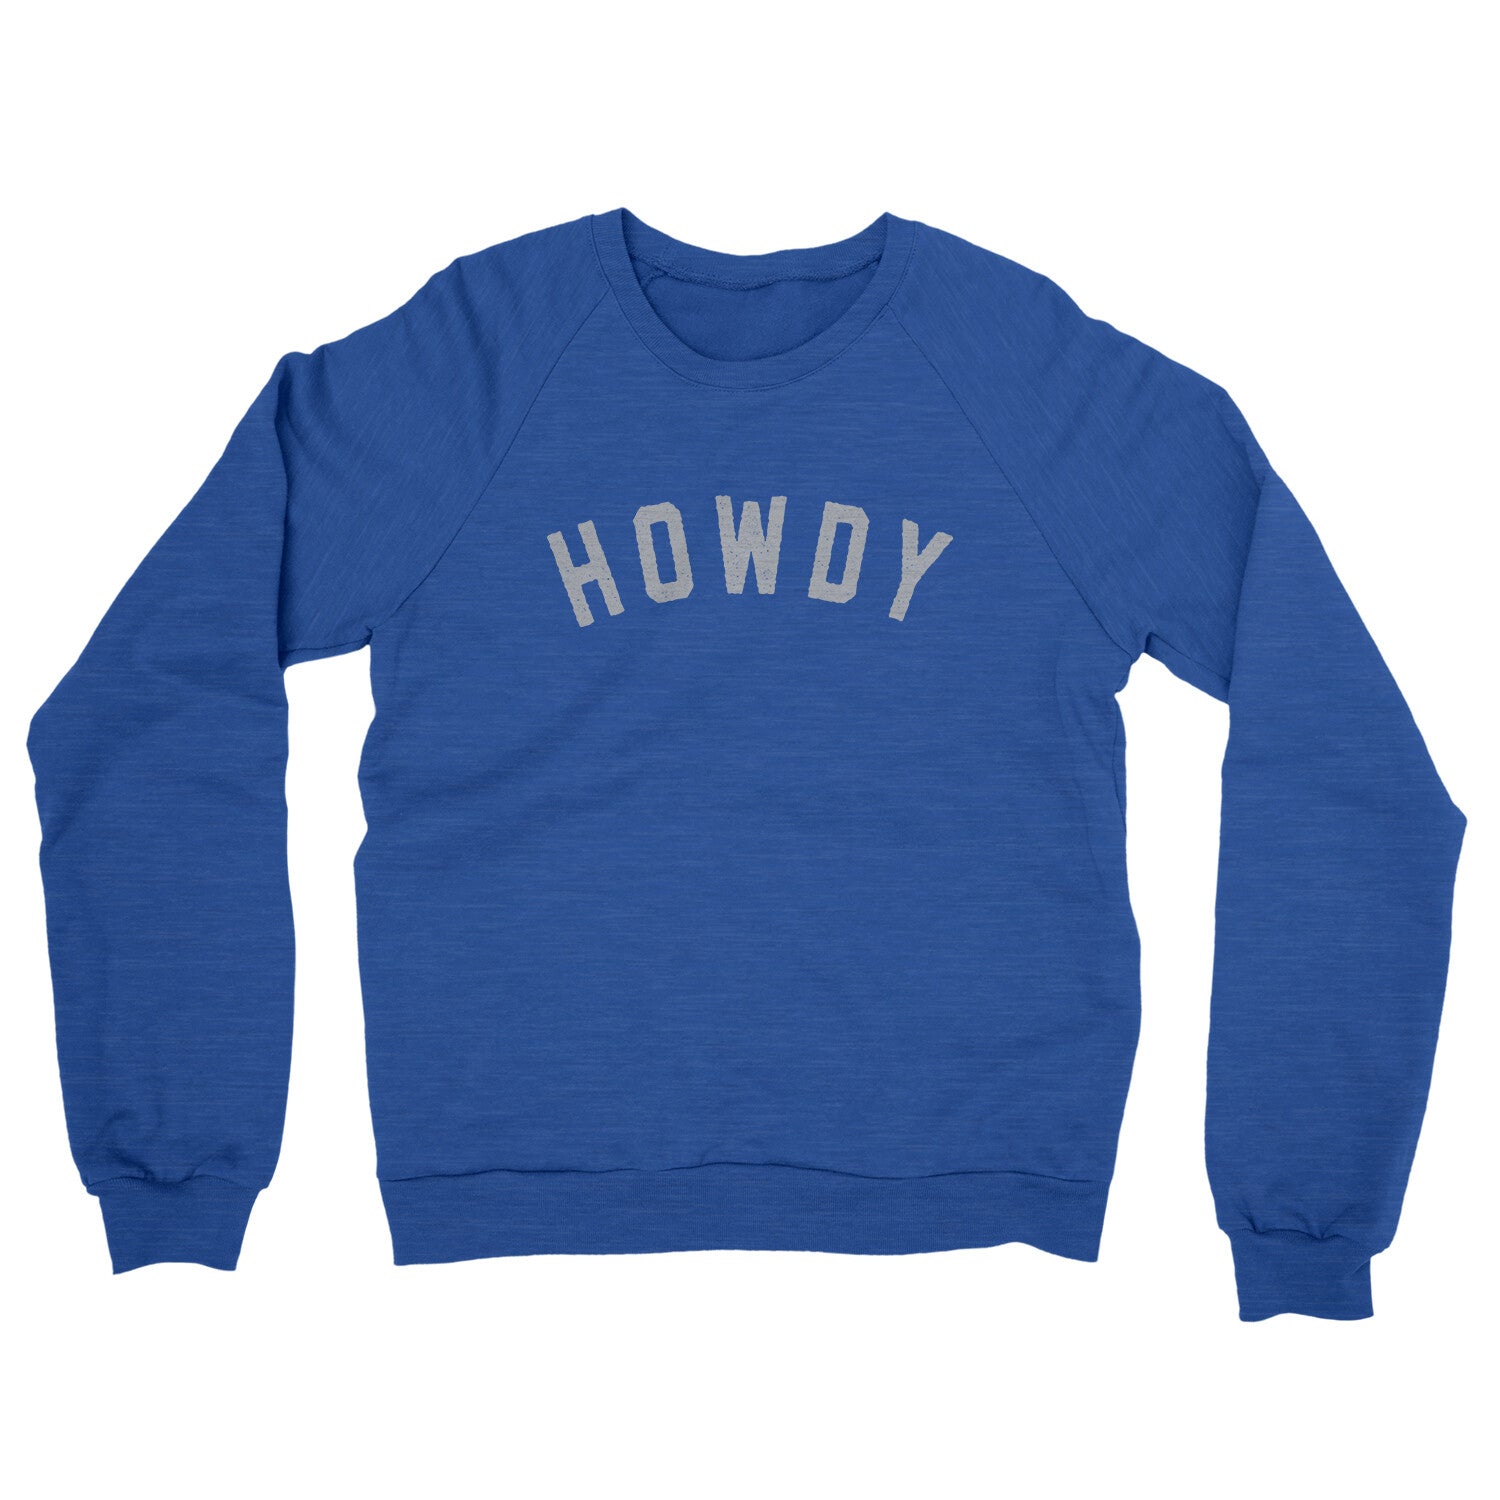 Howdy in Heather Royal Color